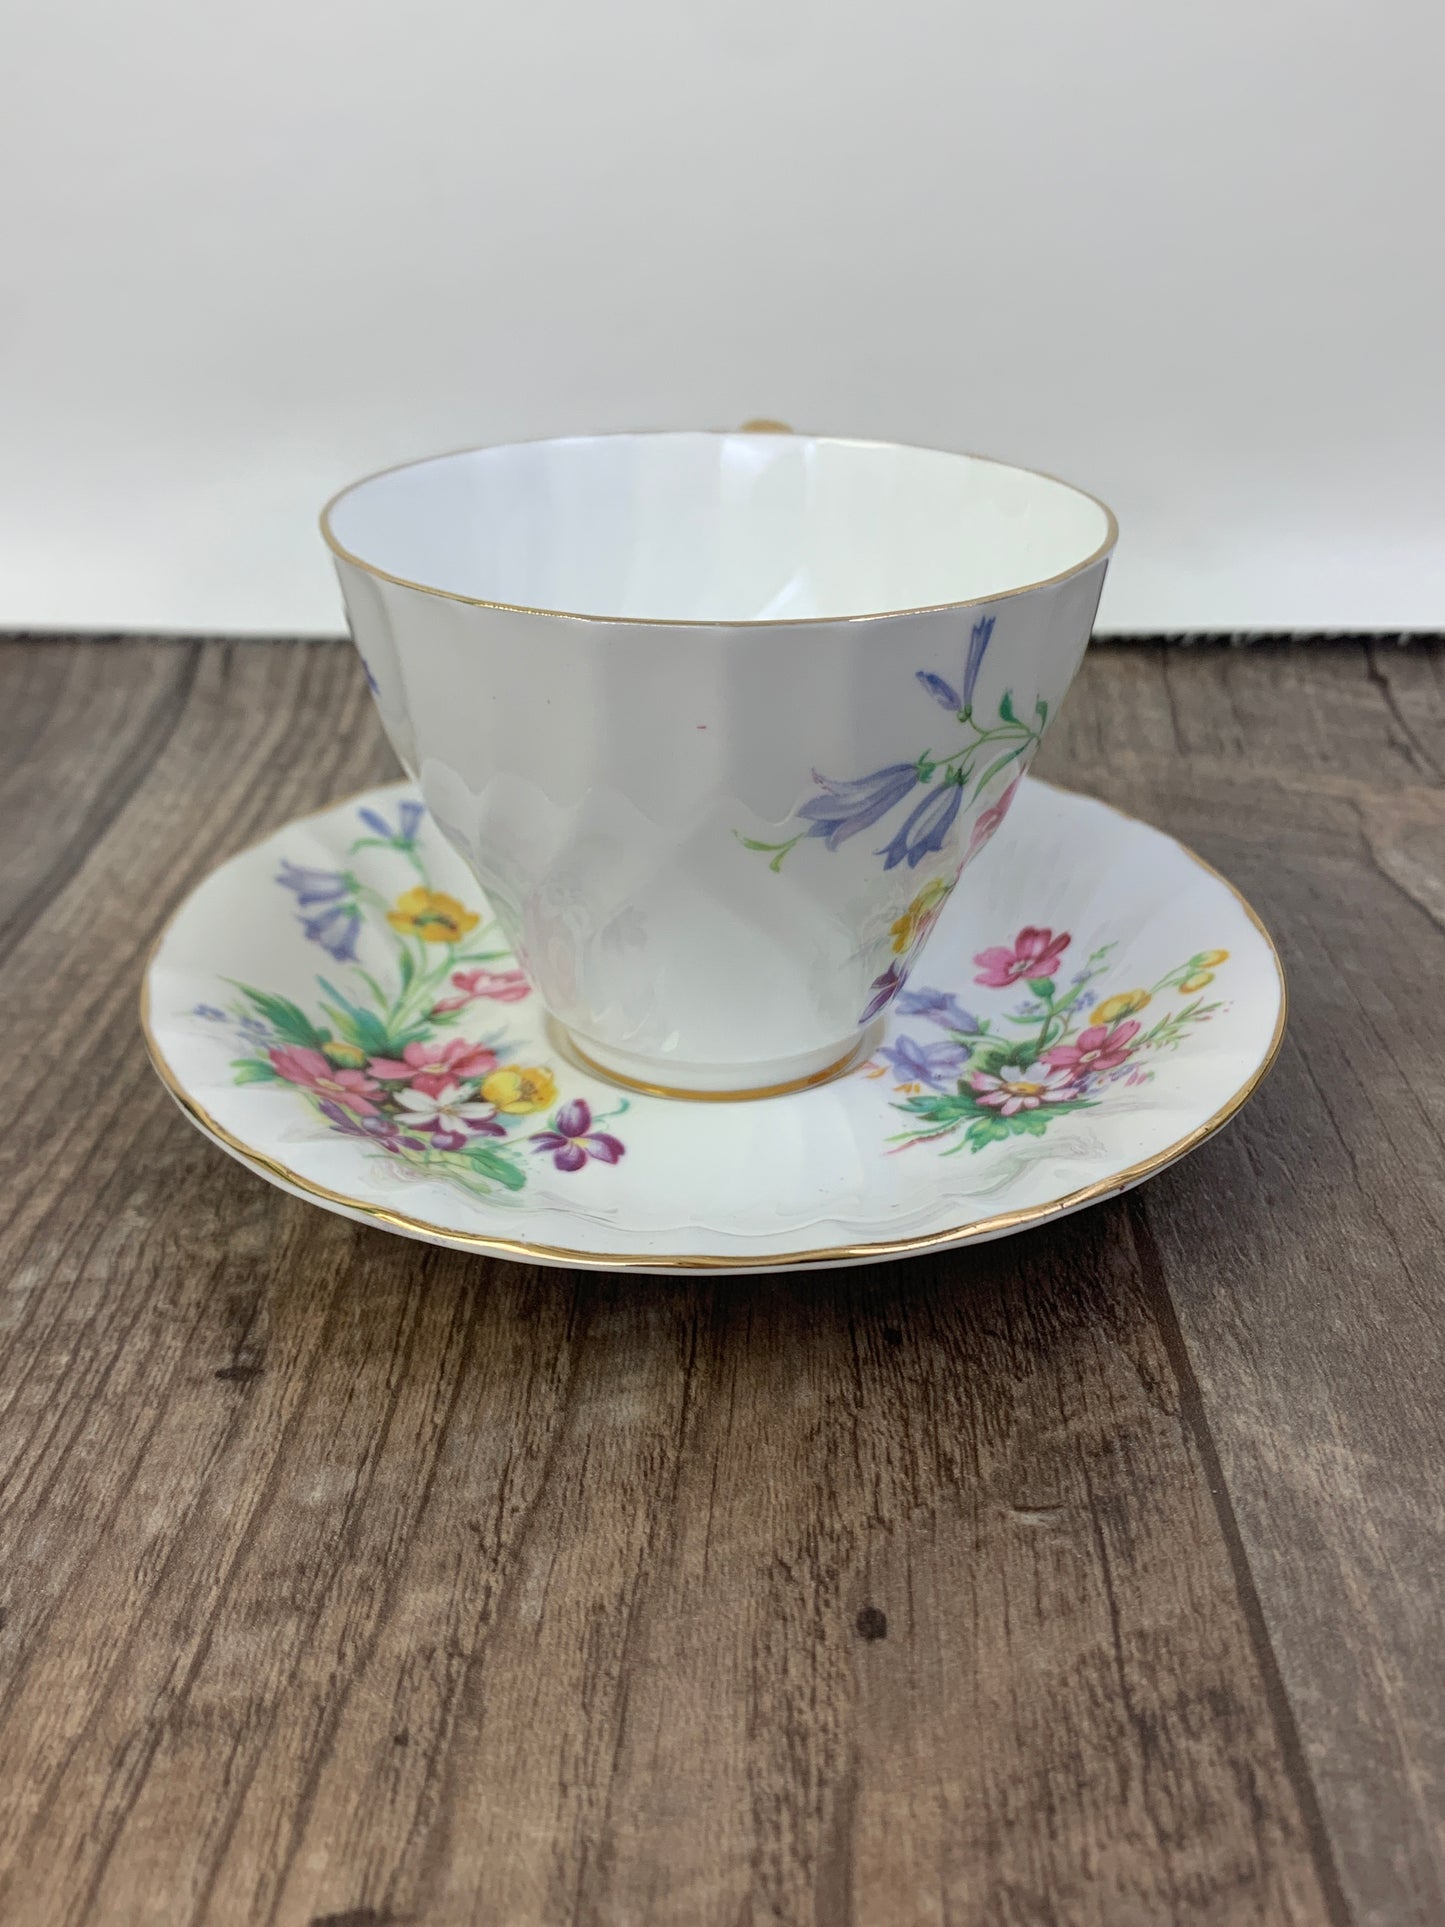 White Vintage Teacup with Floral Pattern Swirled Rib Colourful Flowers